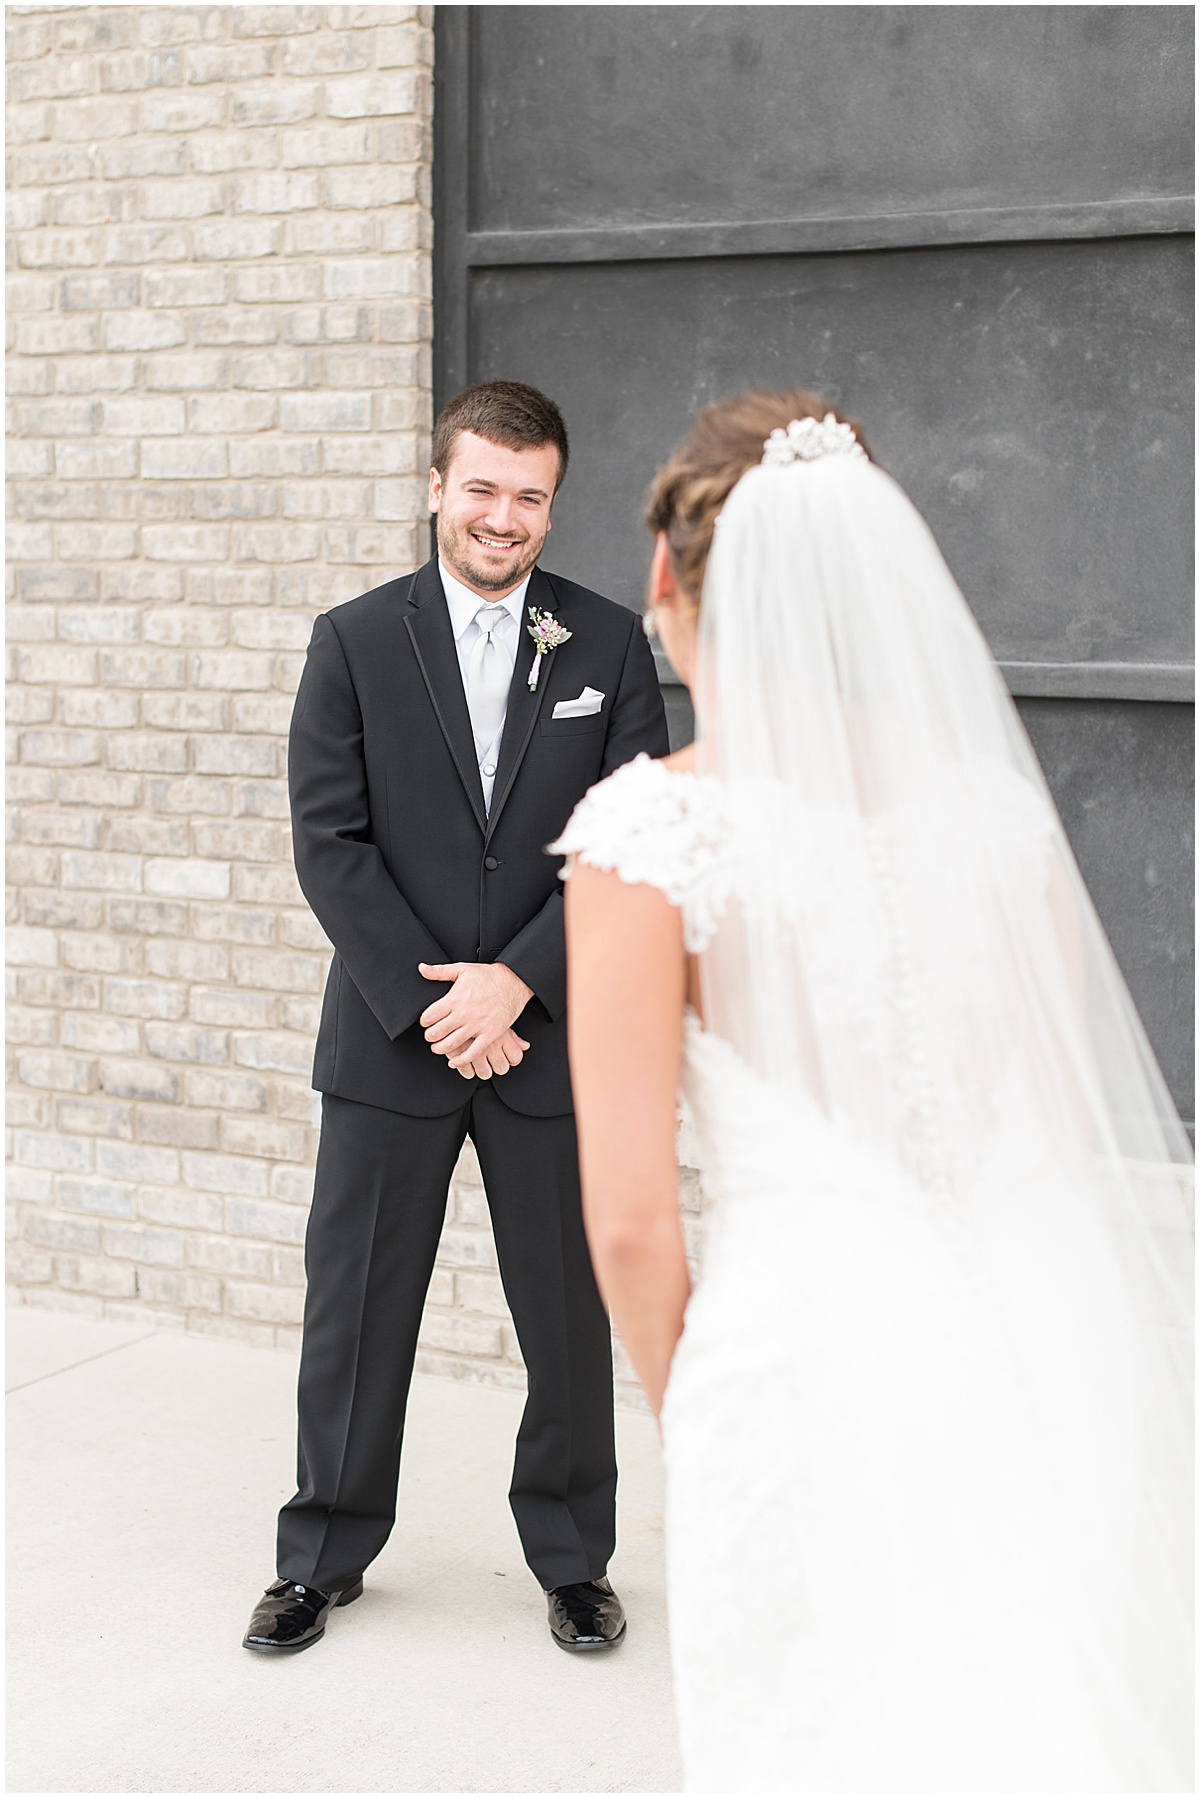 First look before Bel Air Events wedding in Kokomo, Indiana by Victoria Rayburn Photography